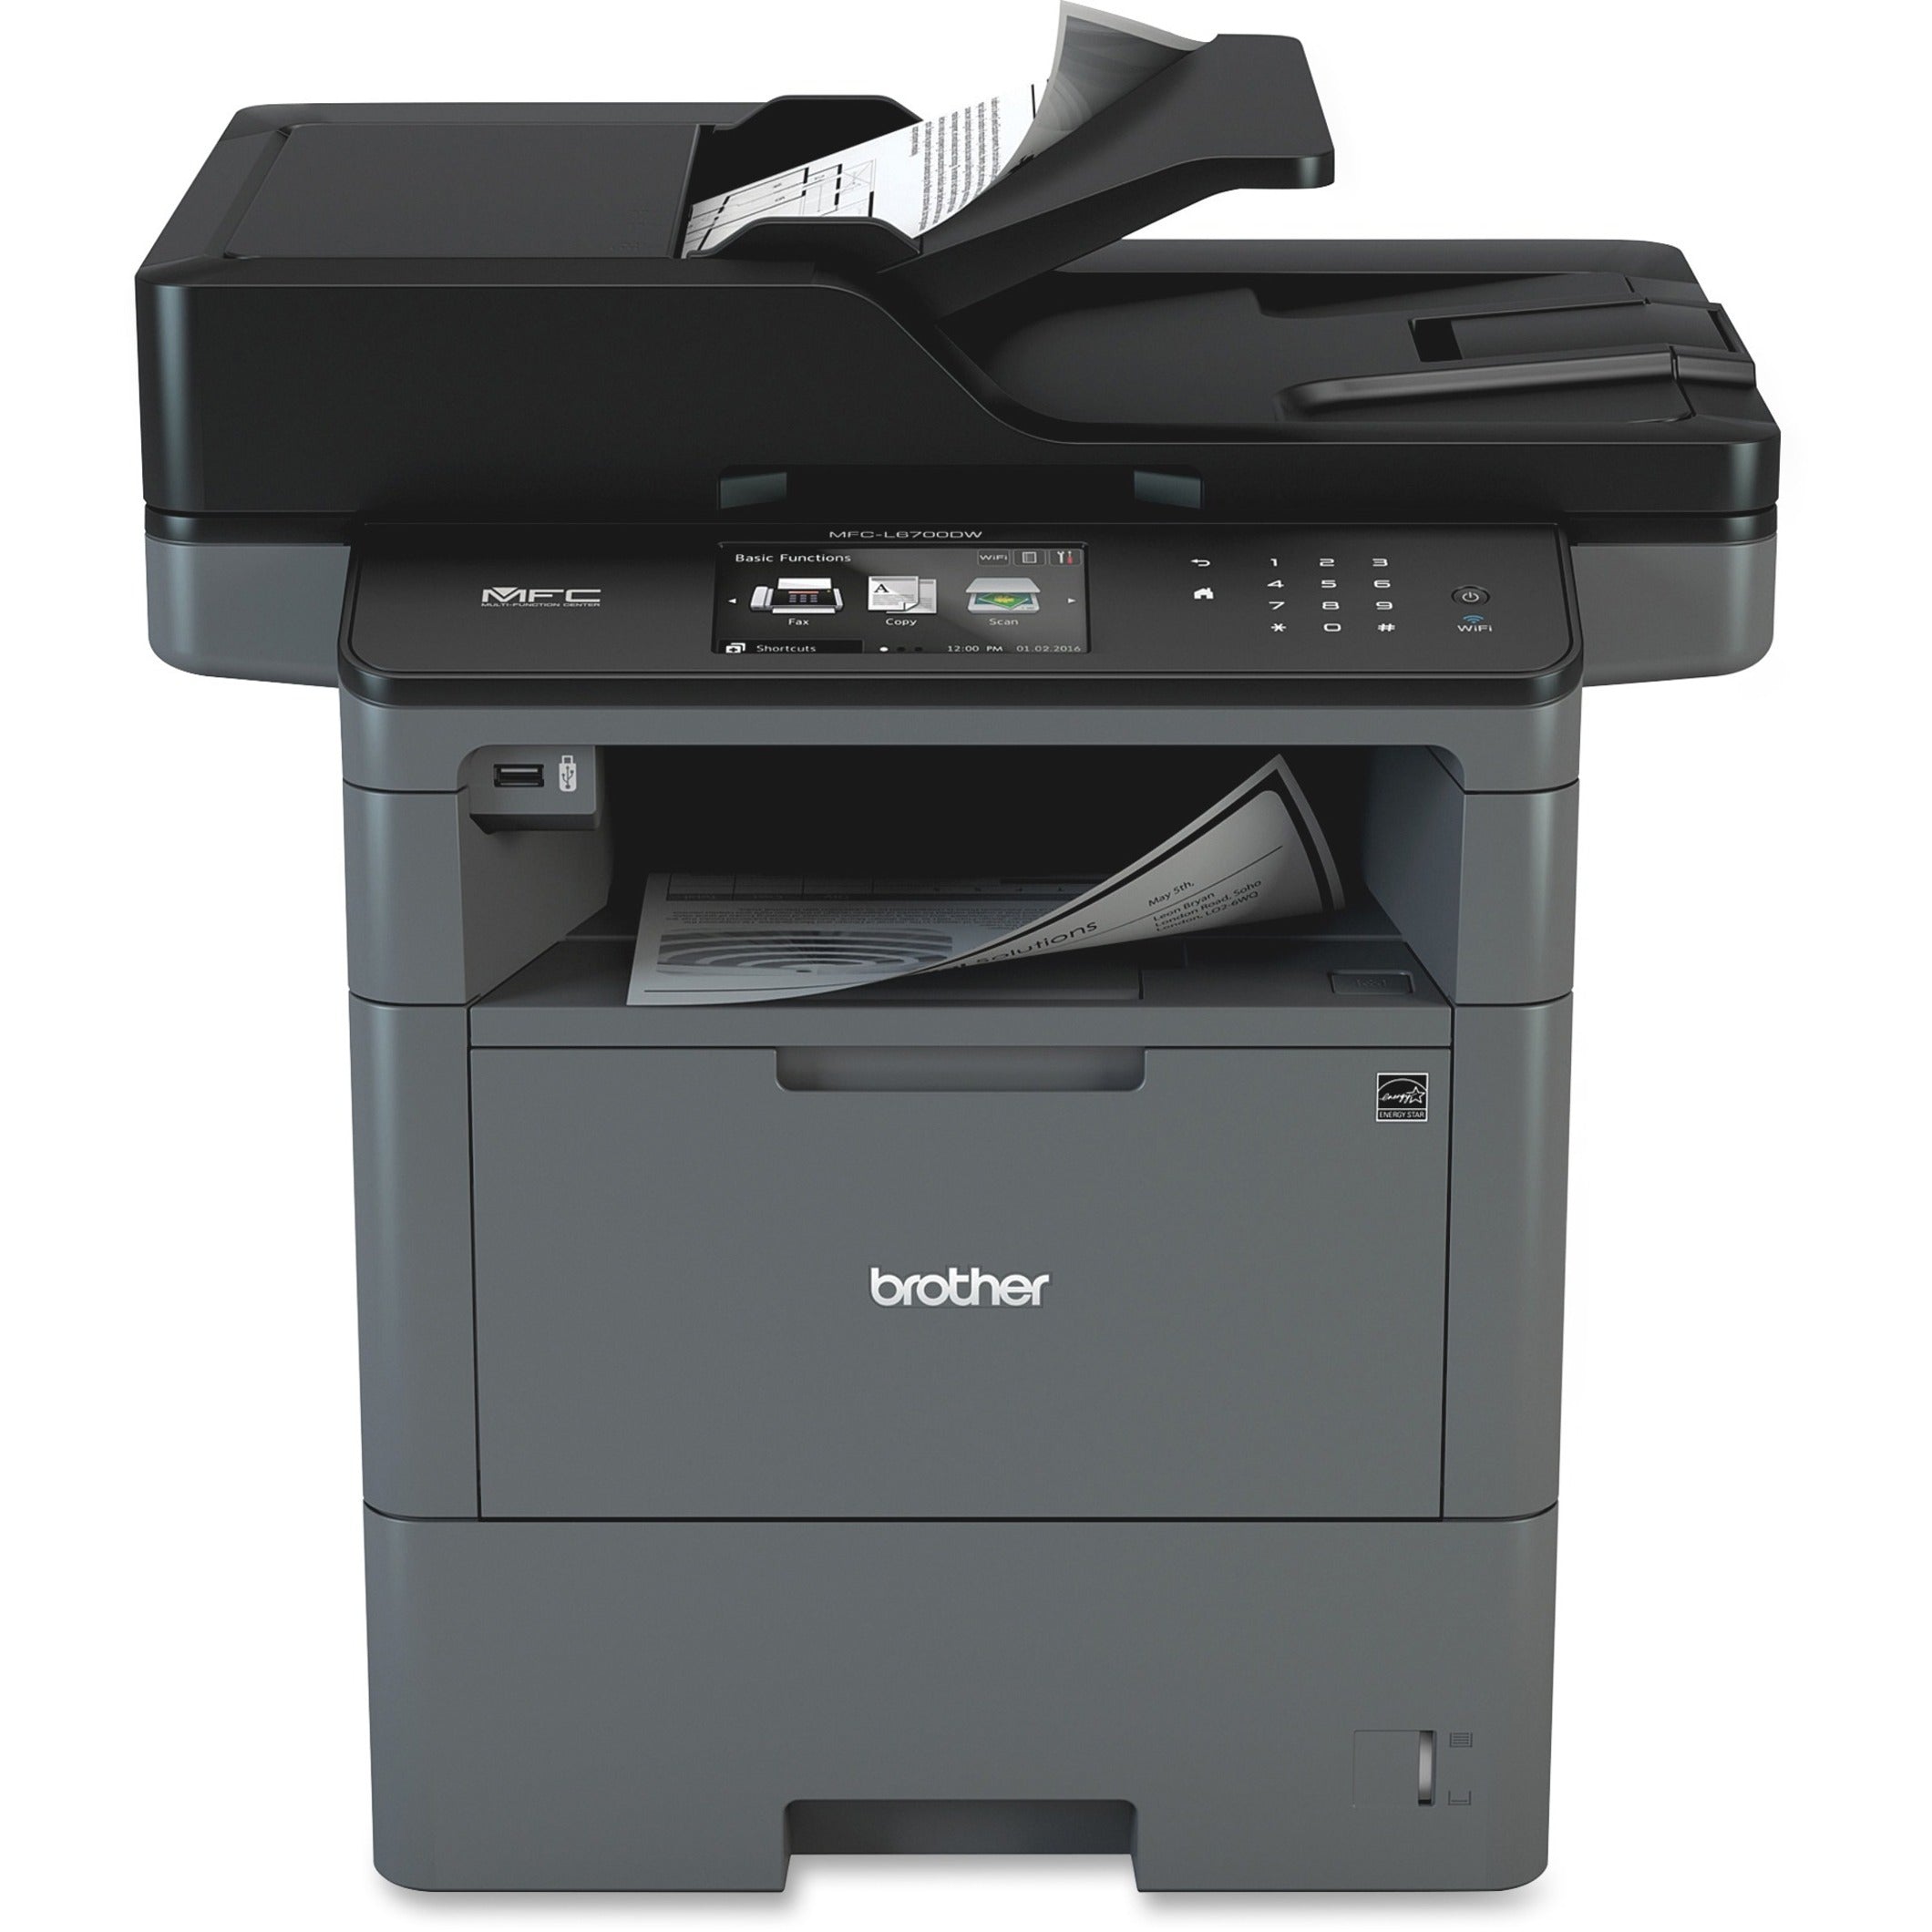 Brother MFCL6700DW Laser All-in-one Printer, 48ppm, 570-Sheet Capacity, Black/Gray